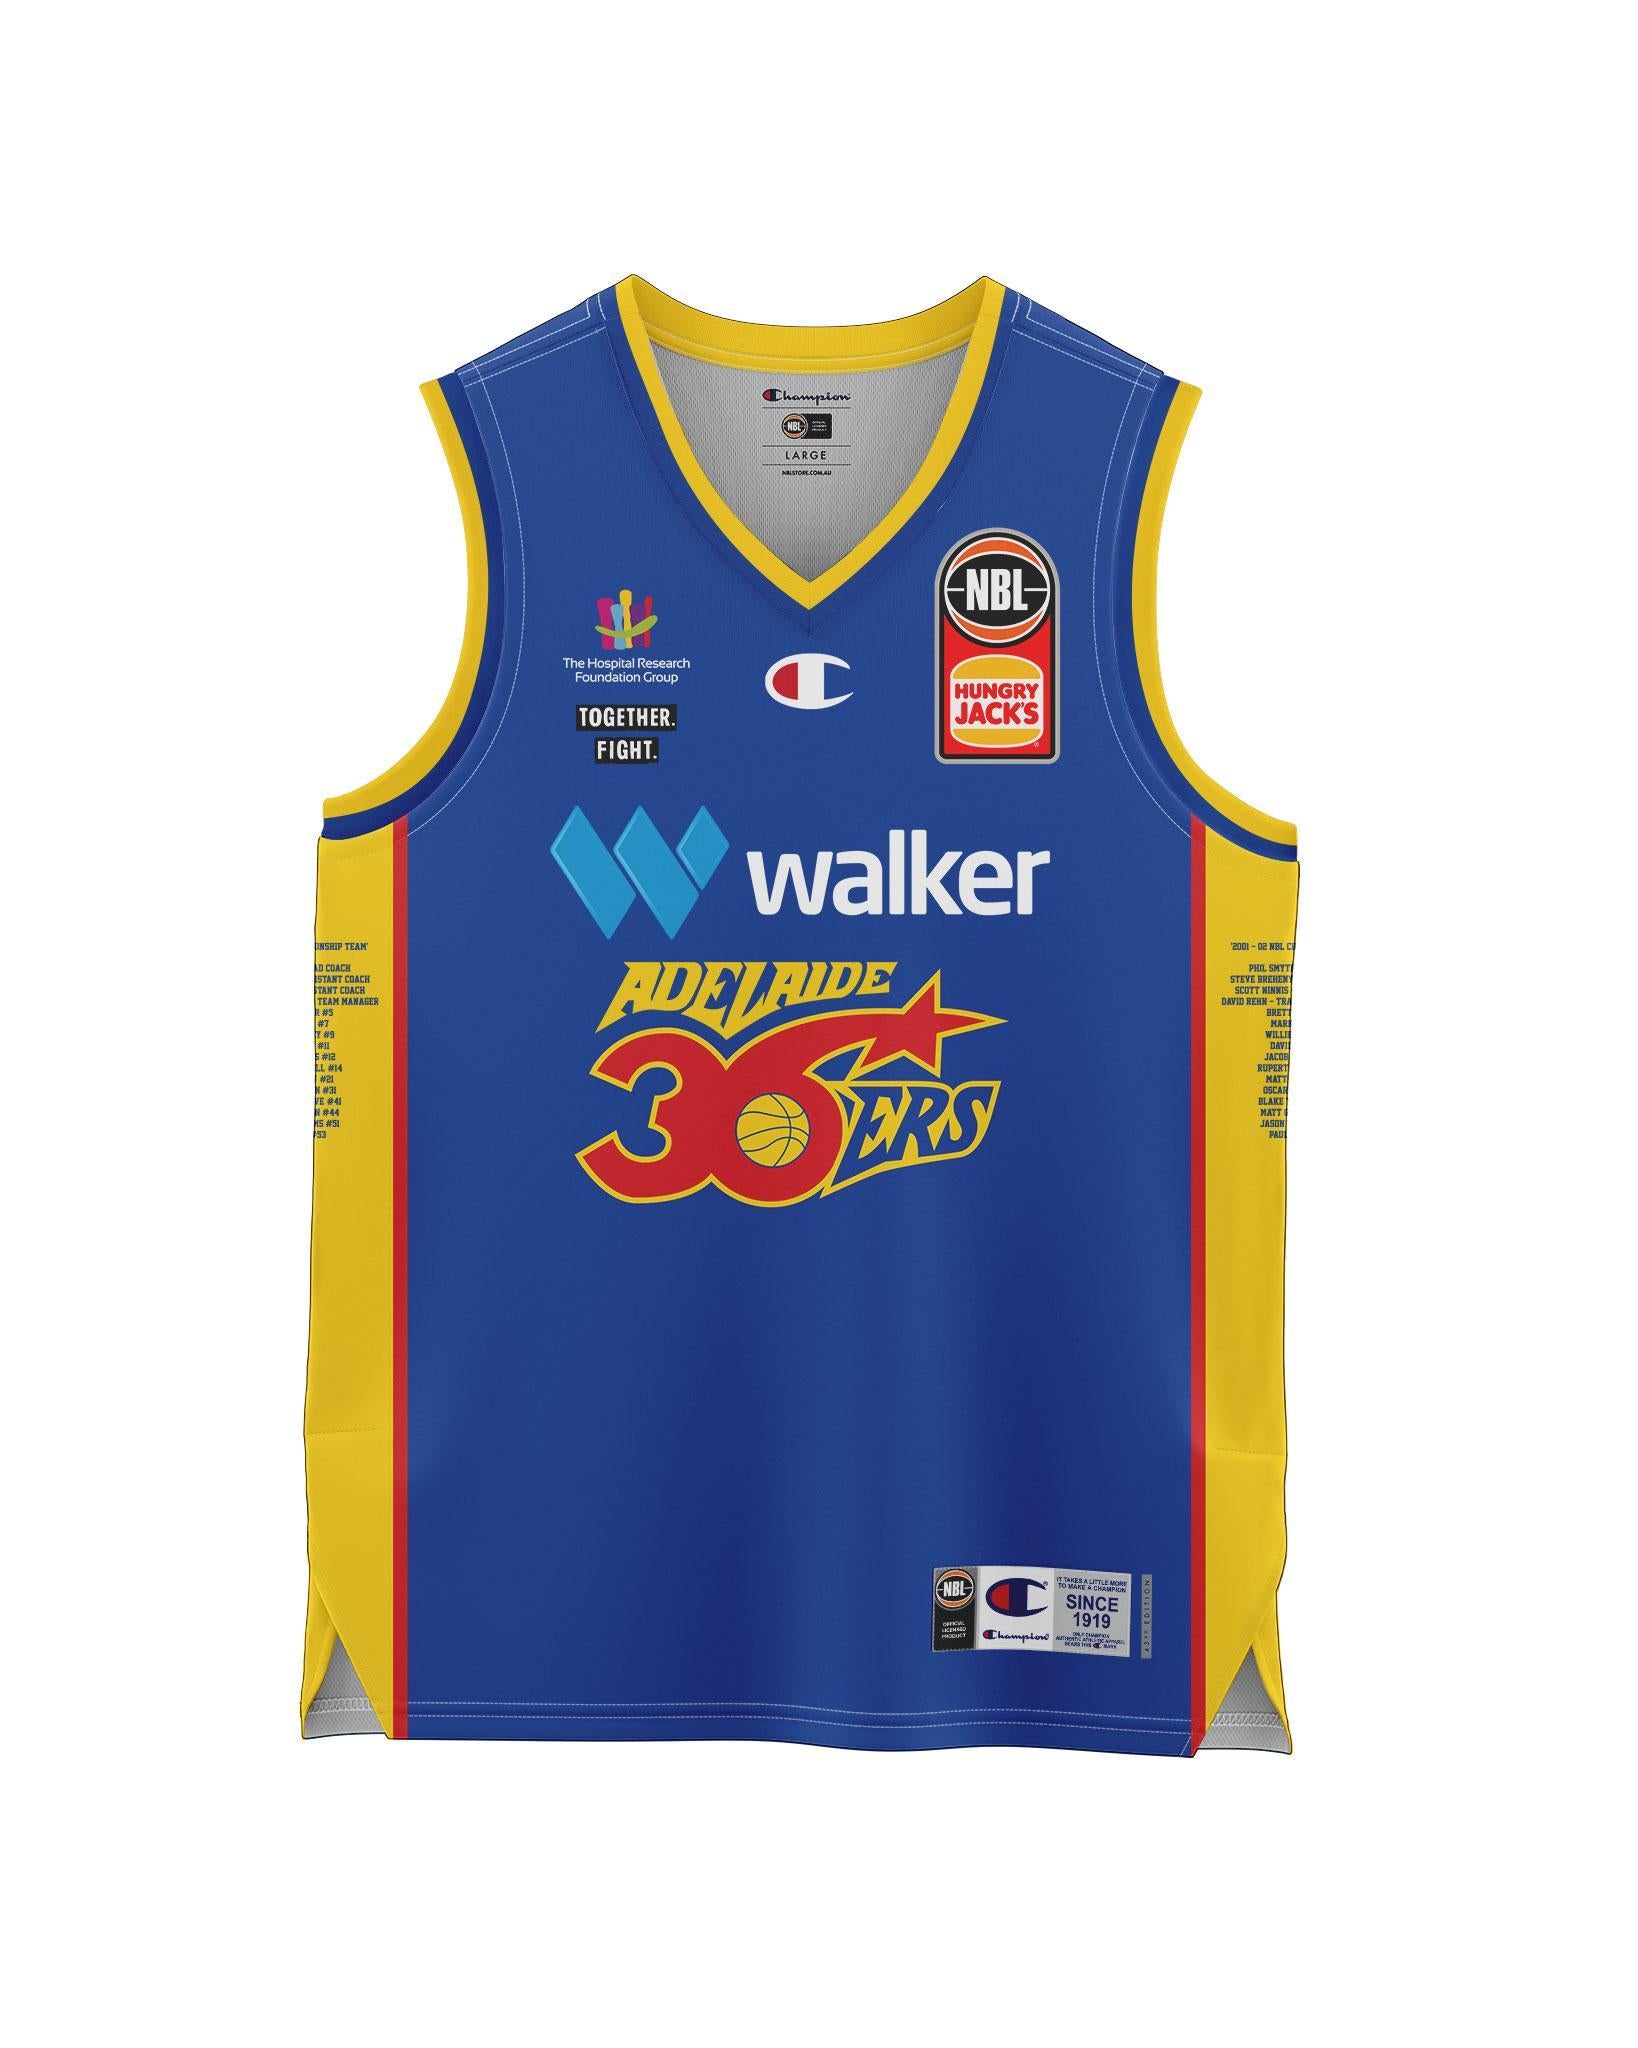 Adelaide 36ers 2021/22 Authentic Youth Heritage Jersey - Adelaide 36ers